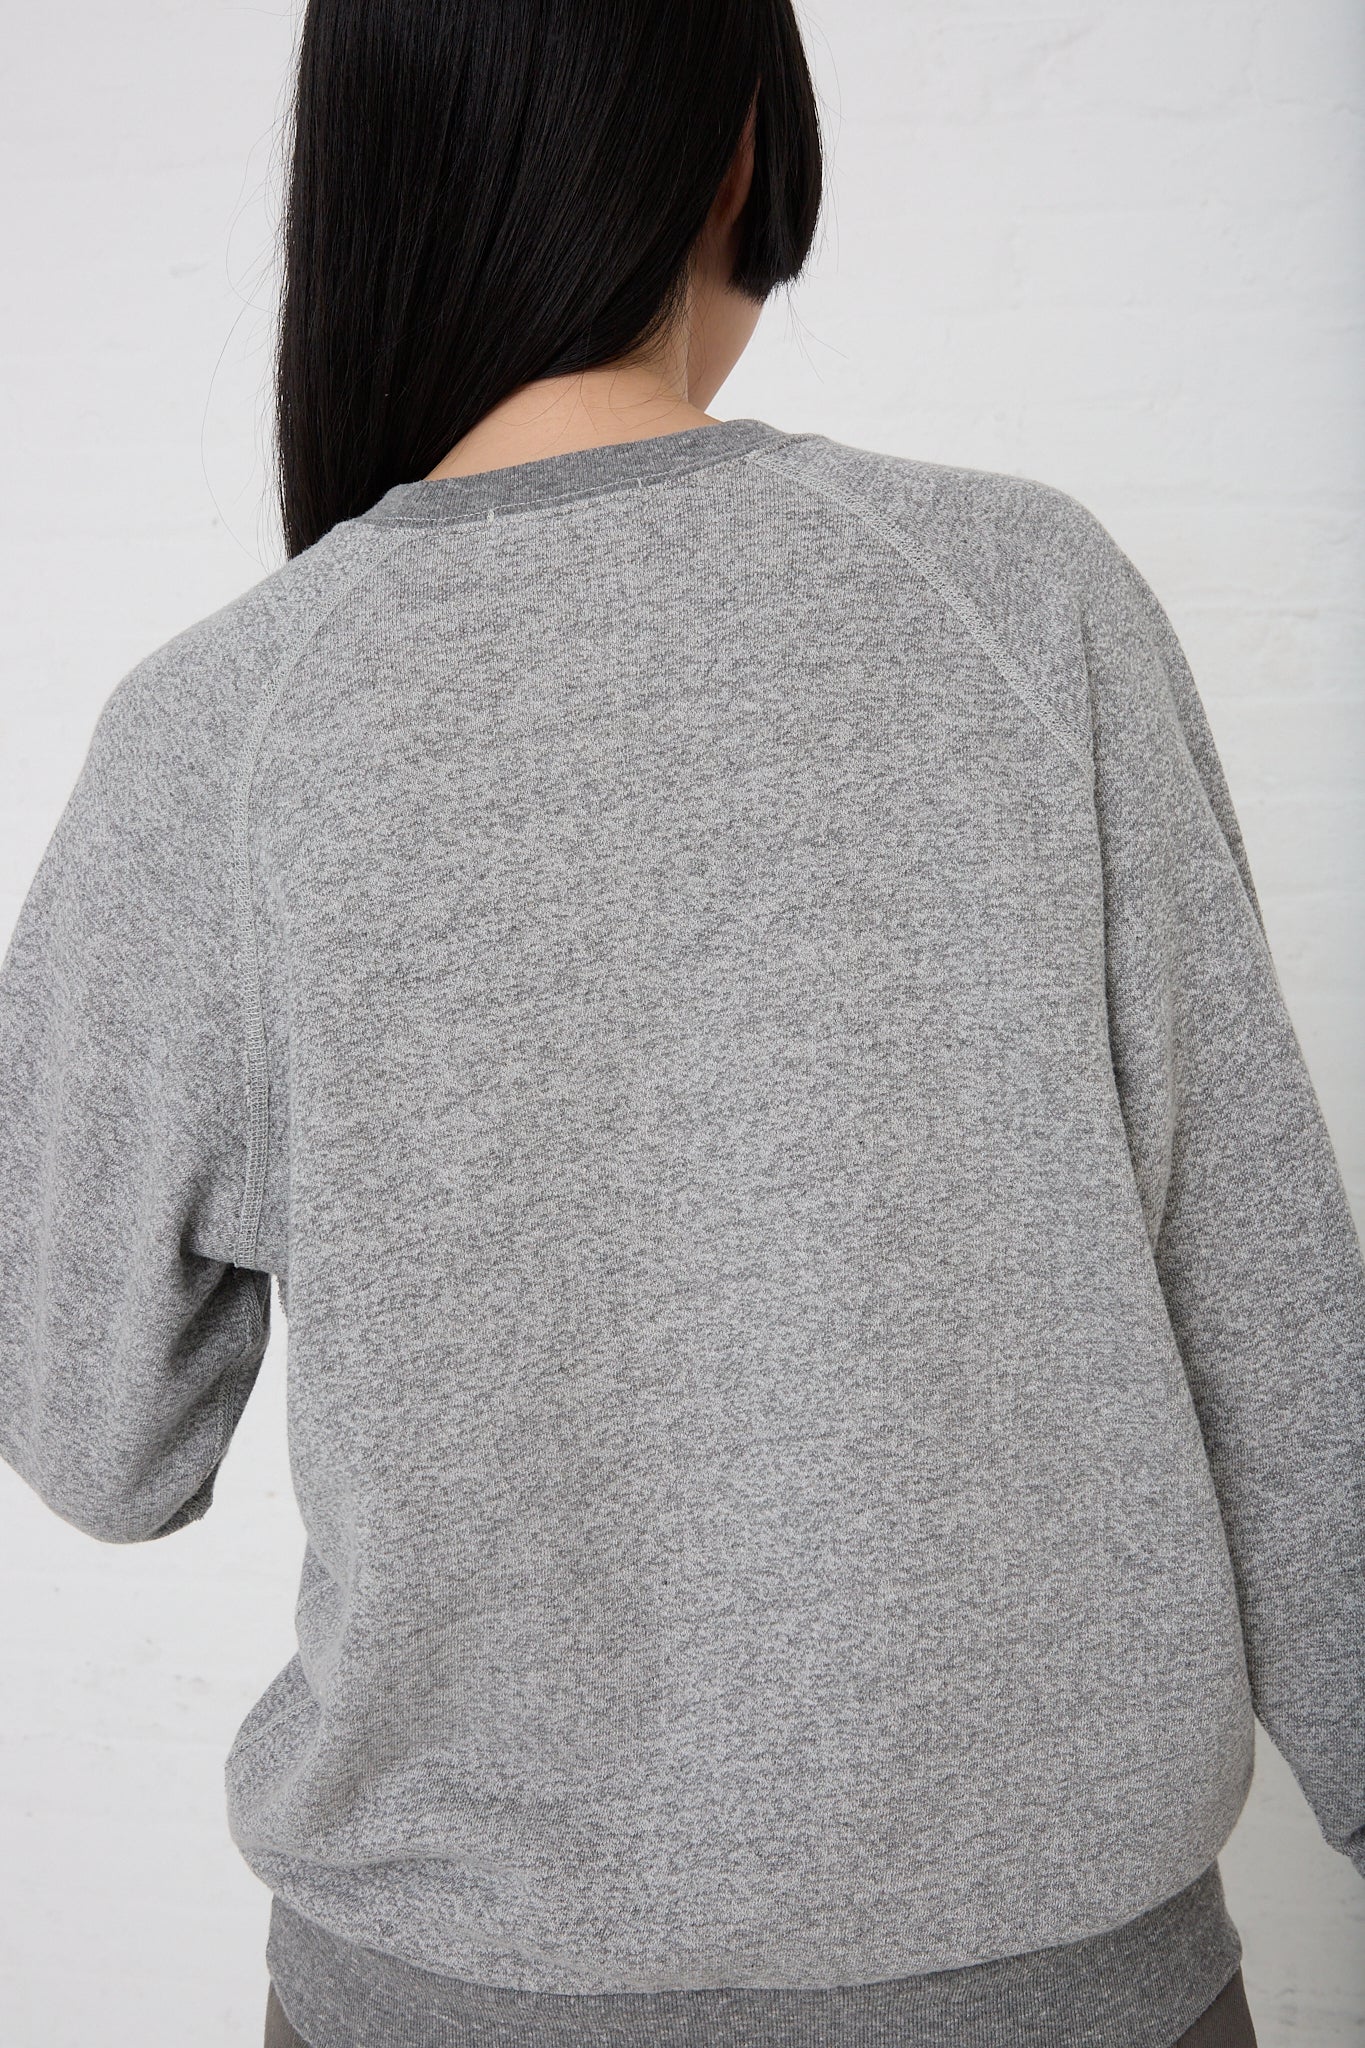 A woman wearing a B Sides French Terry Sweatshirt in Heather Grey. Back view.